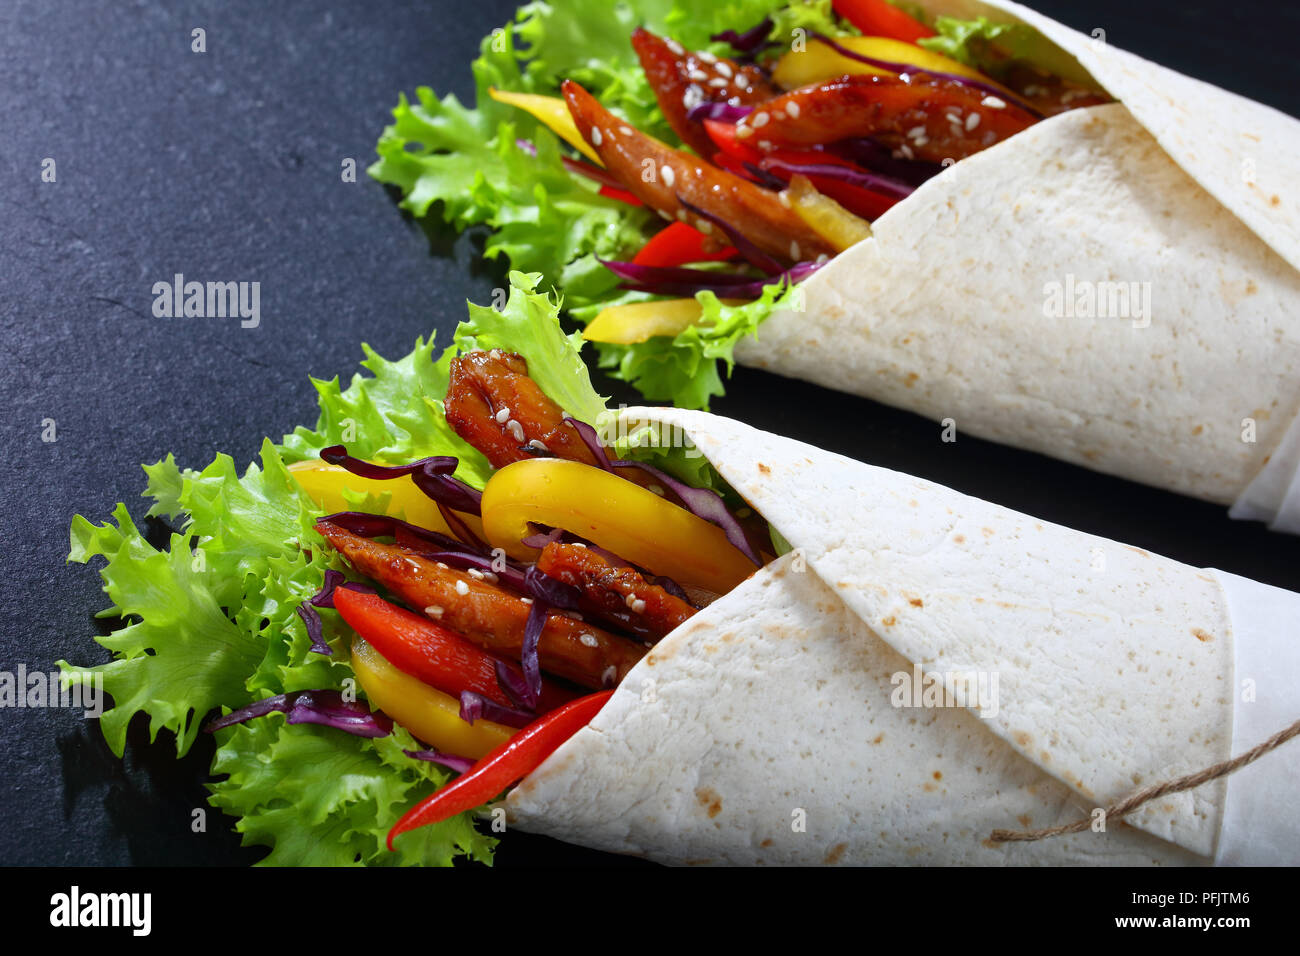 close-up of delicious fresh juicy flatbread sandwich wraps with frisee lettuce vegetables salad and  fried spicy chicken fillet on black stone tray, s Stock Photo